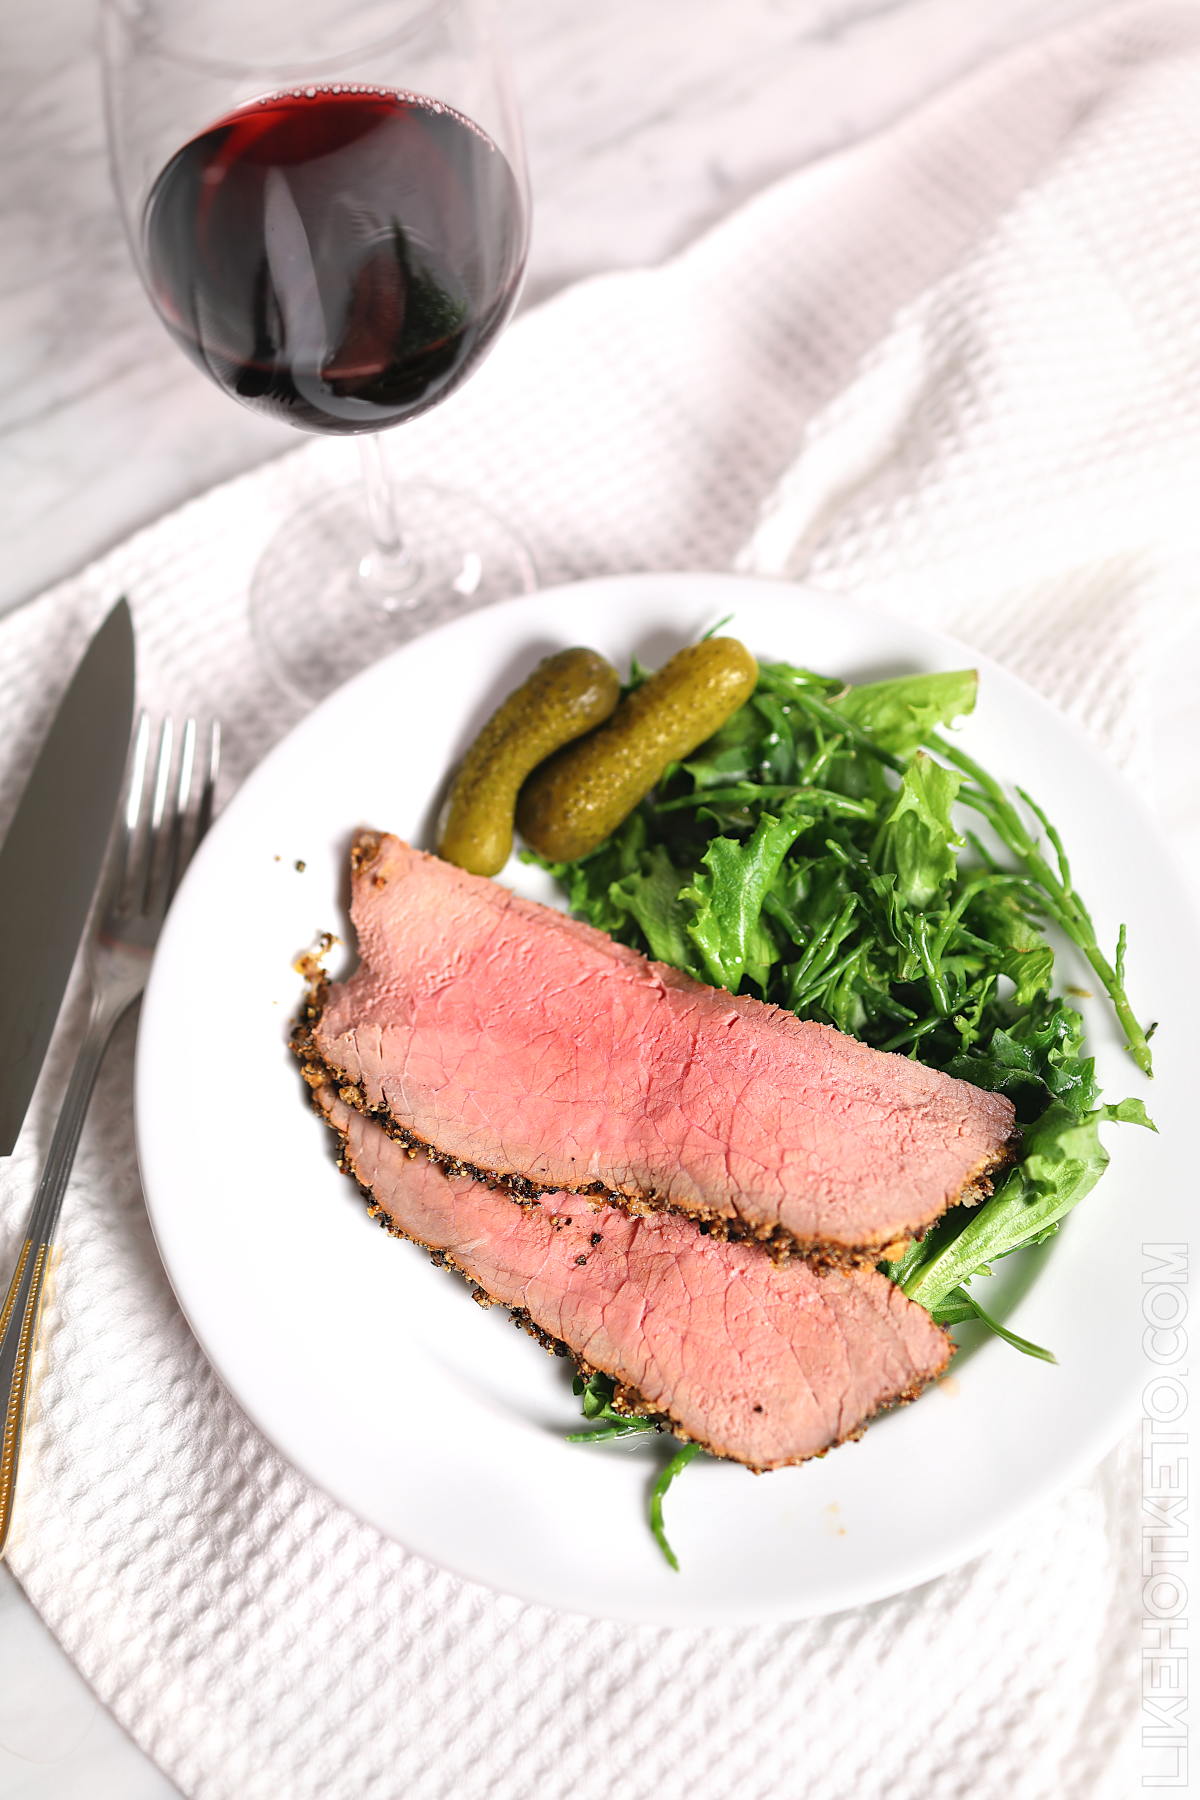 Keto roast beef dinner, with pickles and greens on a white plate, with a glass of red wine.